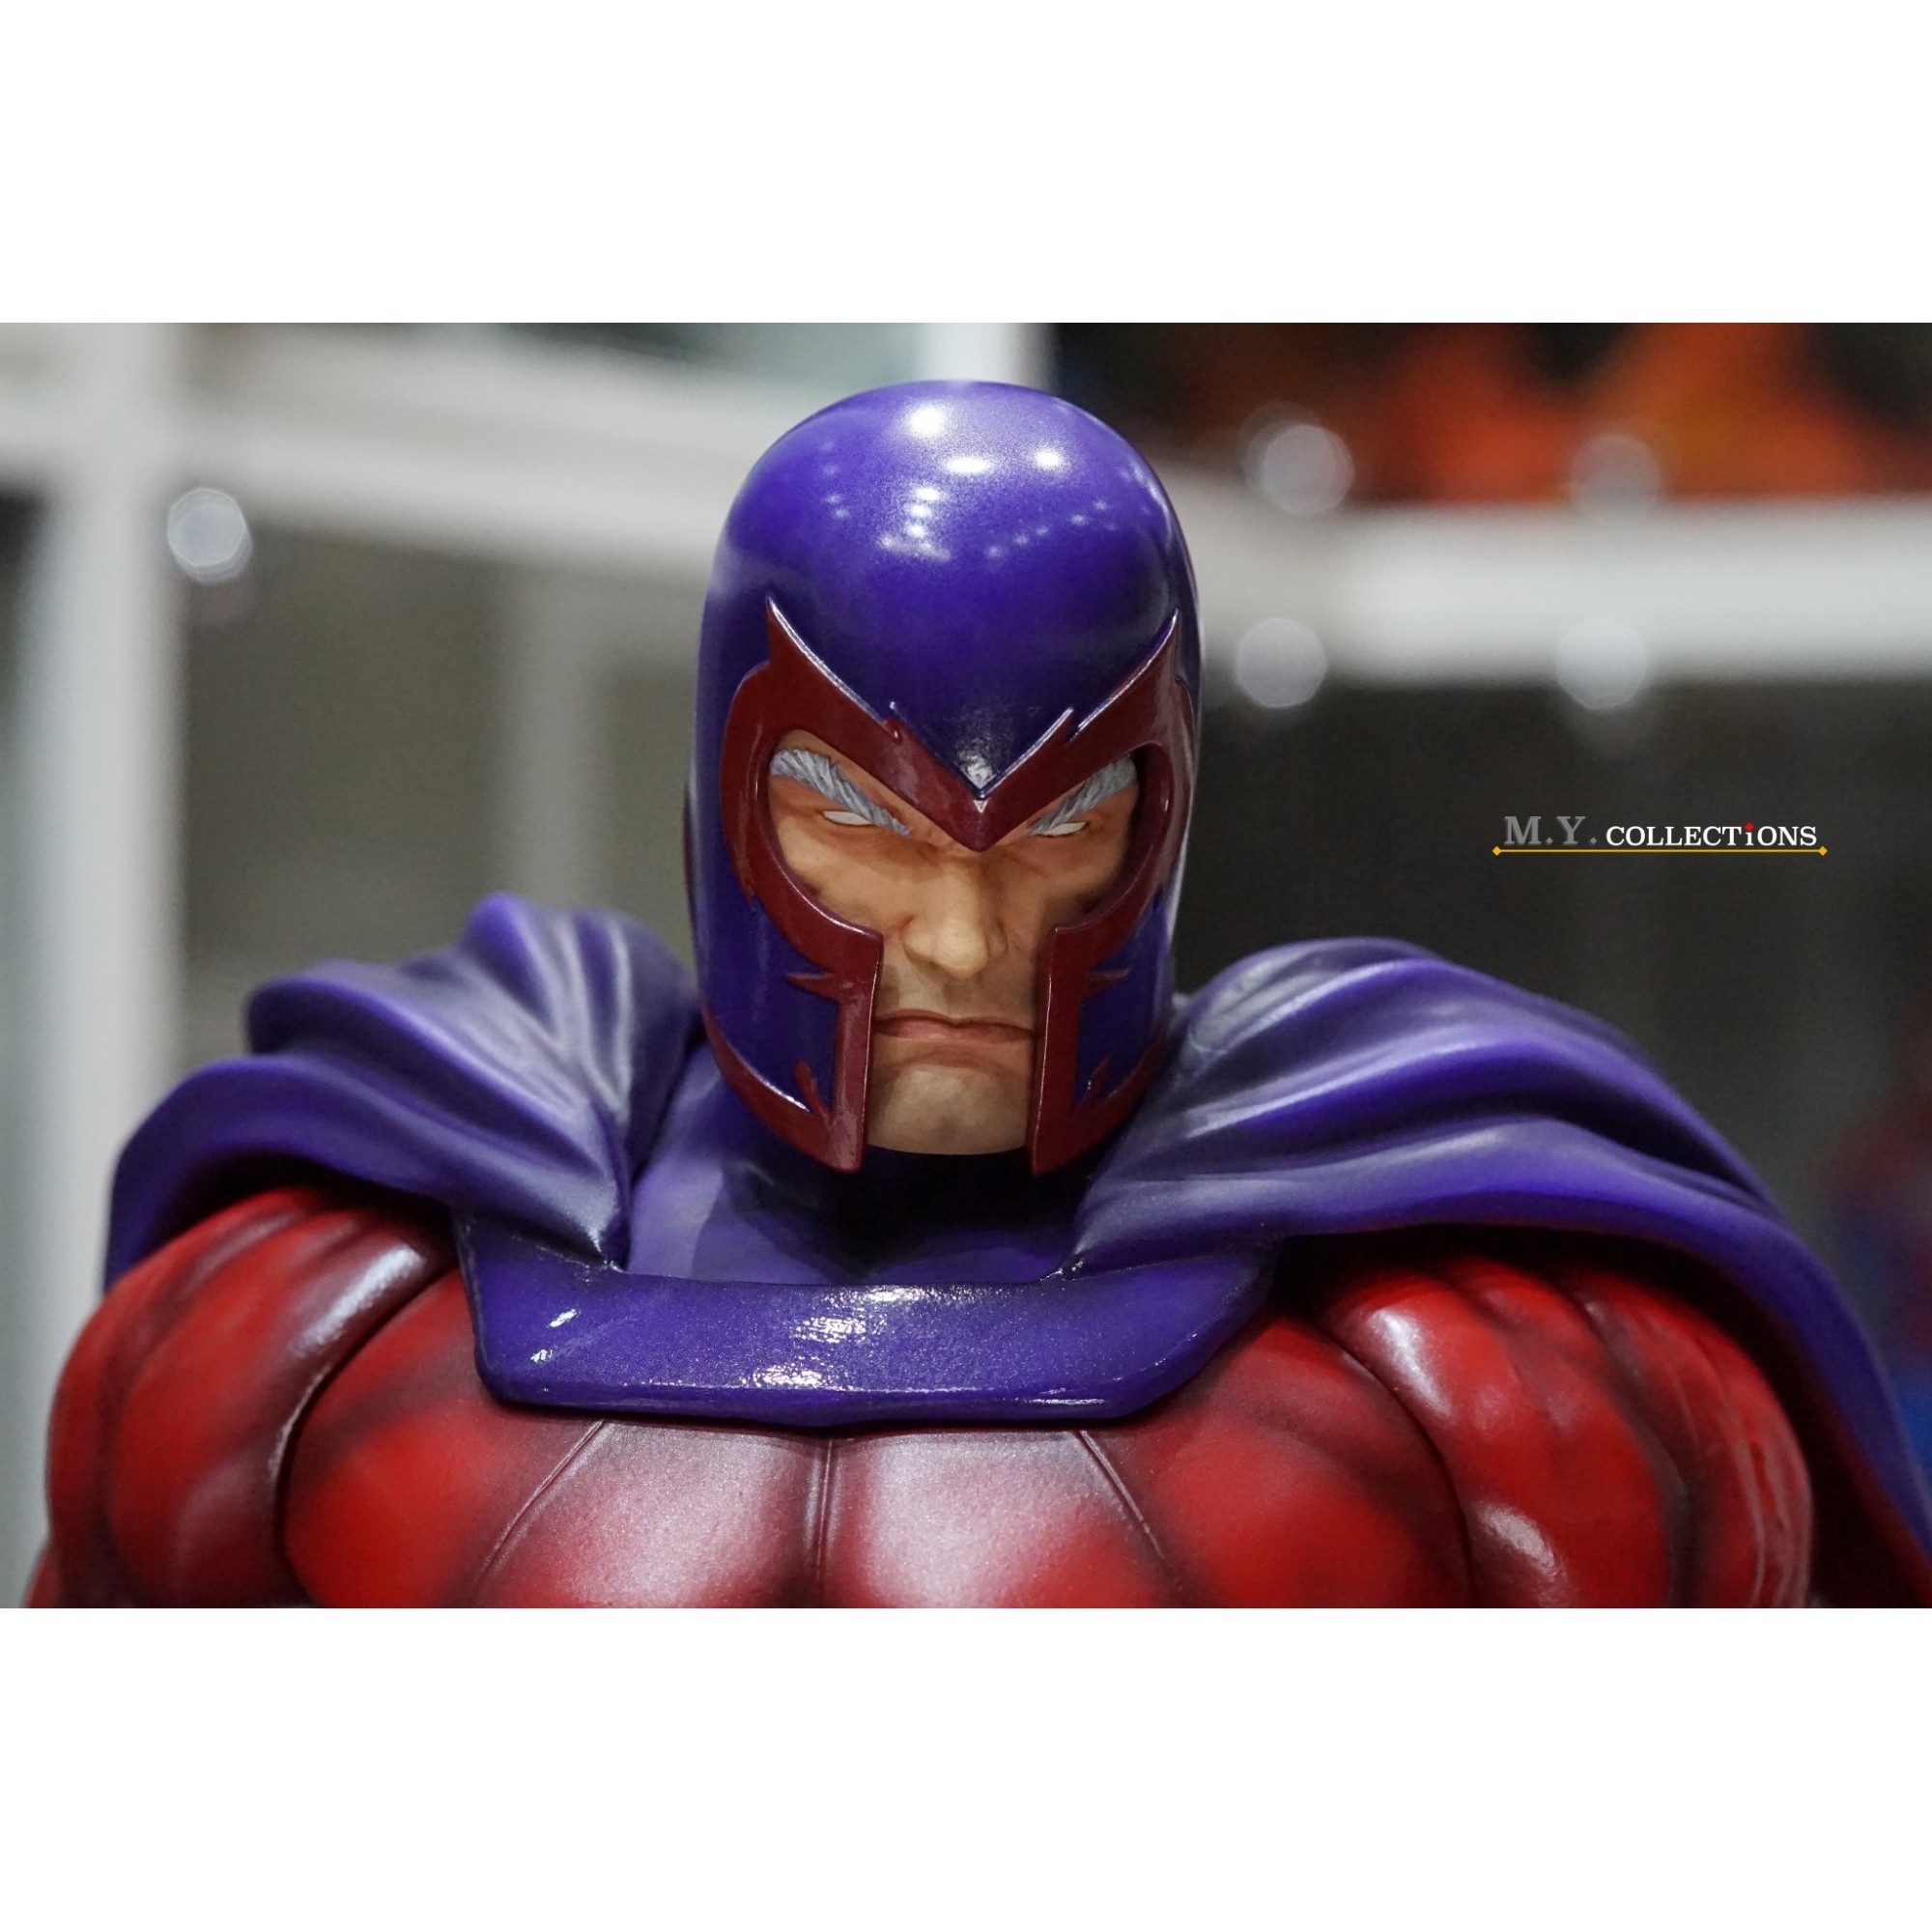 Angry Monkey Magneto Ultimatum 1/4 statue - Movie Freaks Collectibles